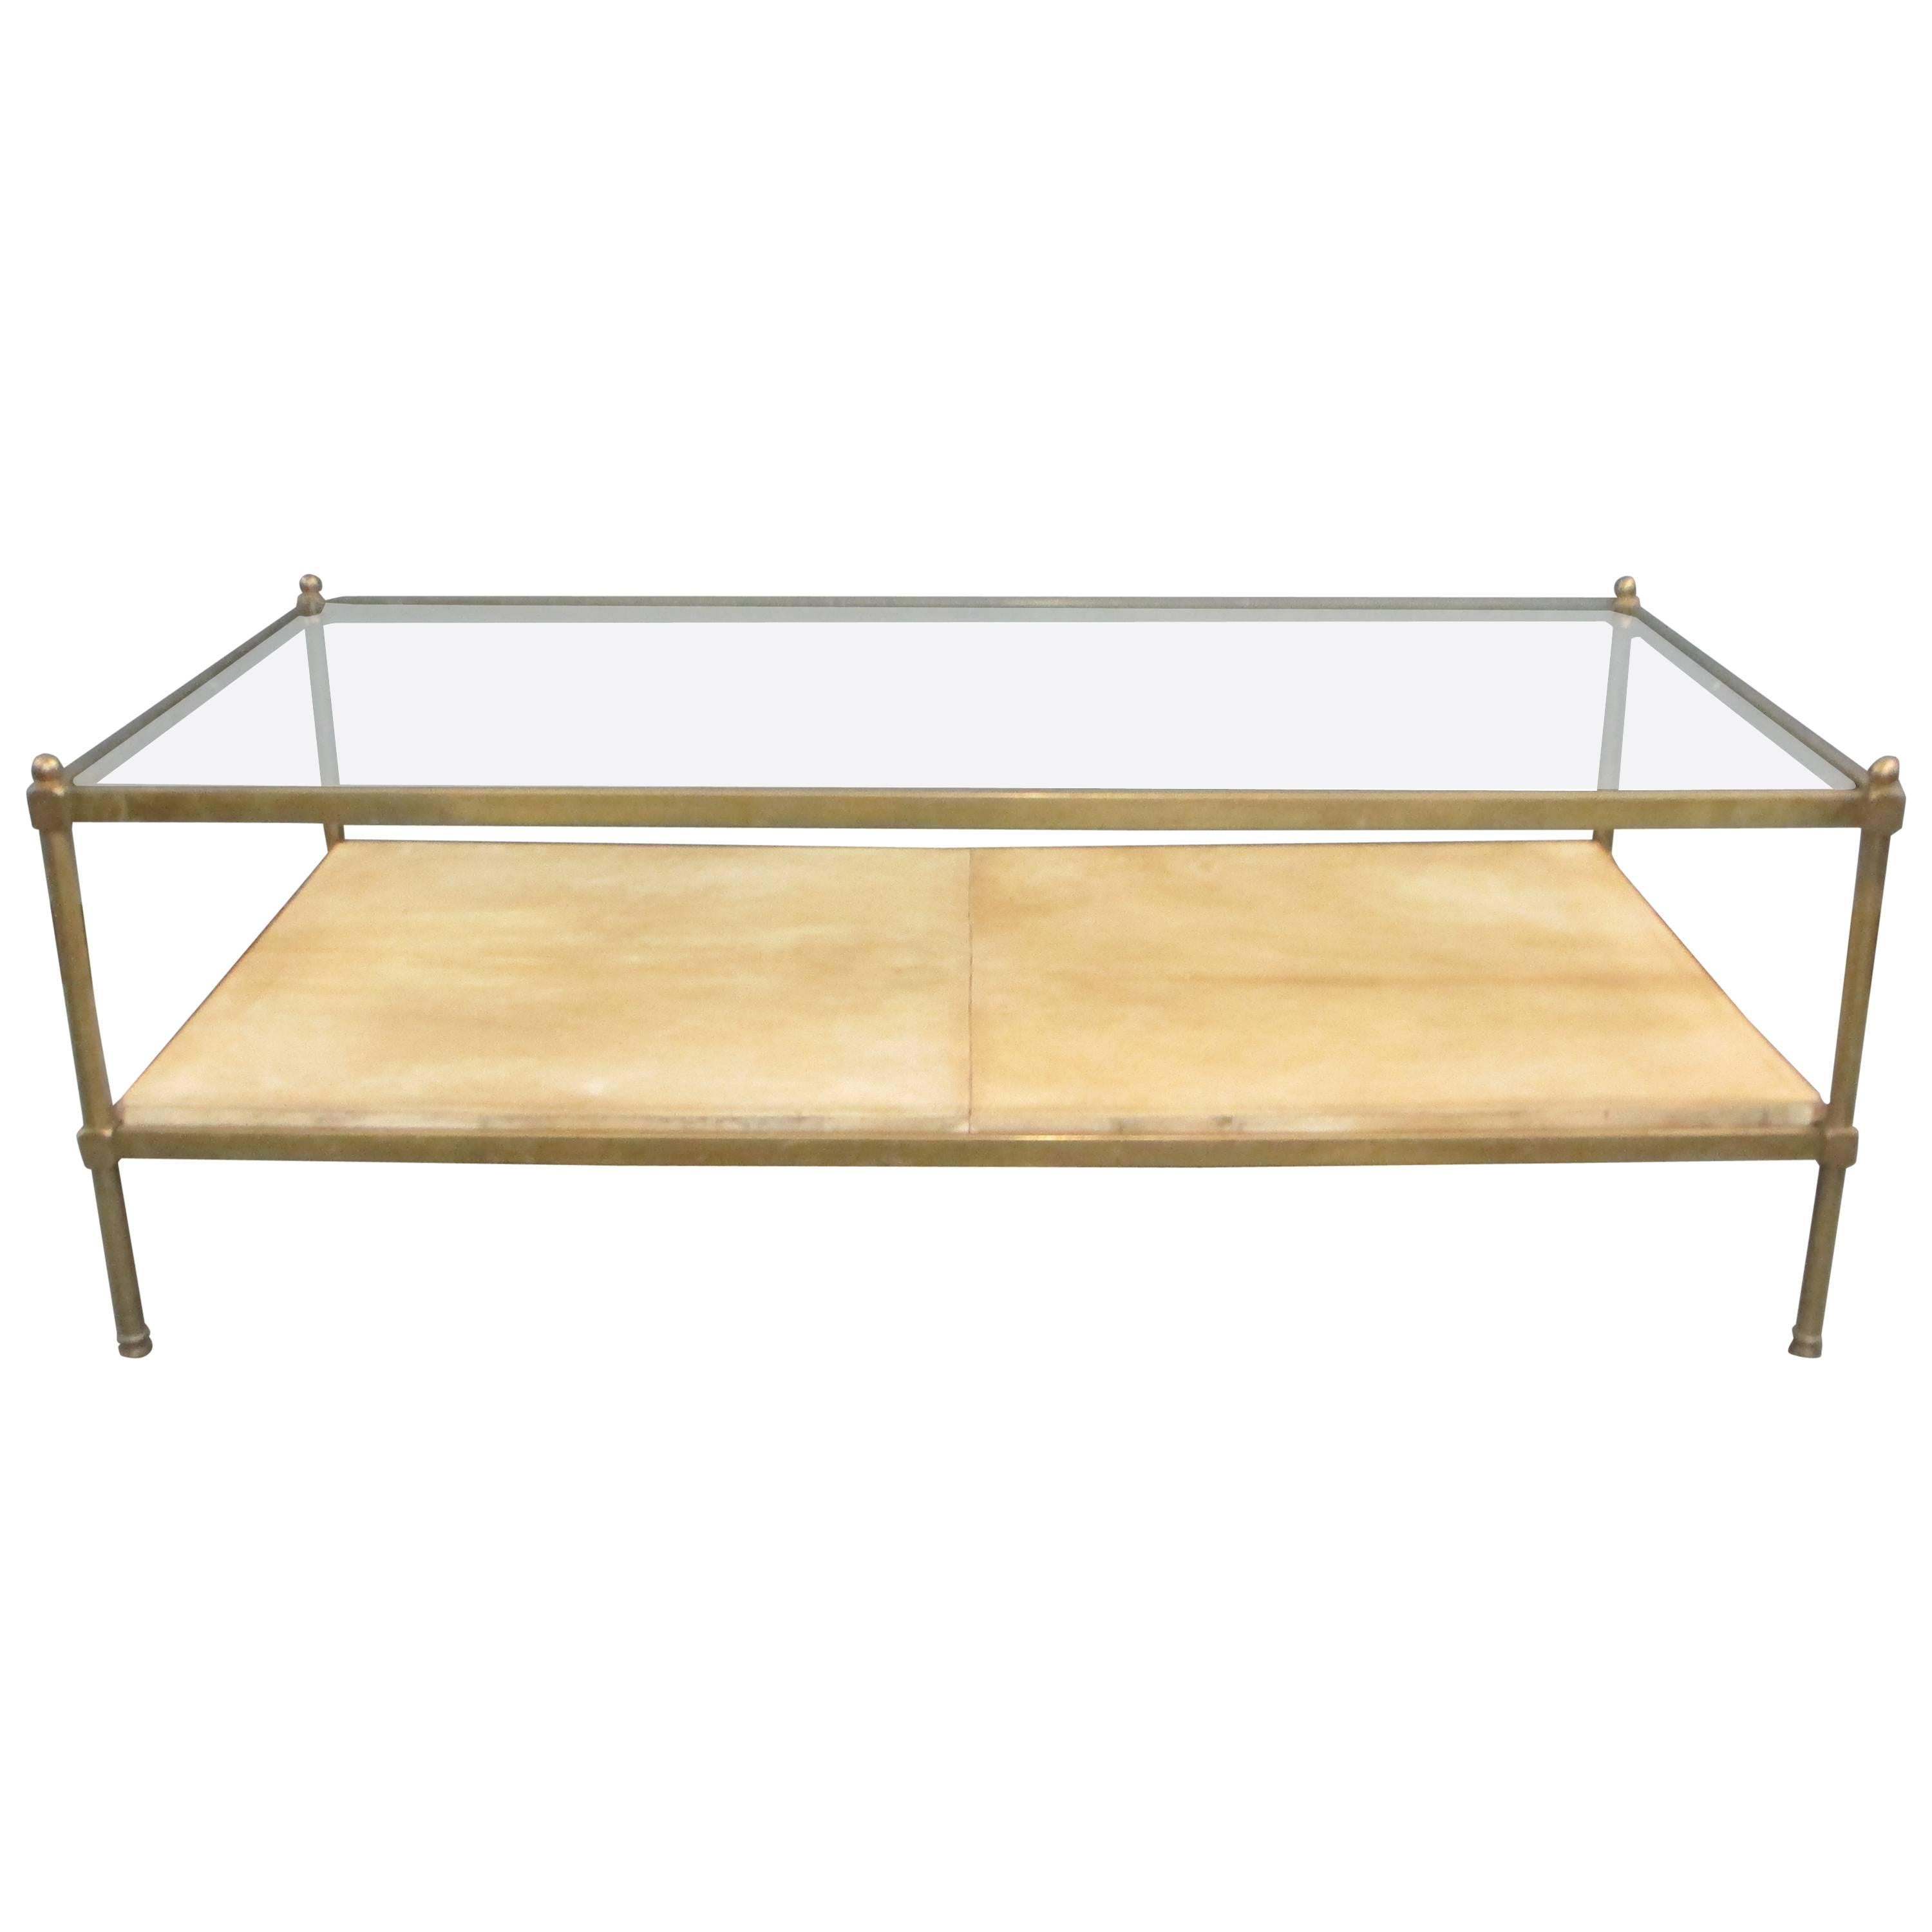 Two-Tiered Bronze Coffee Table with Parchment Shelf